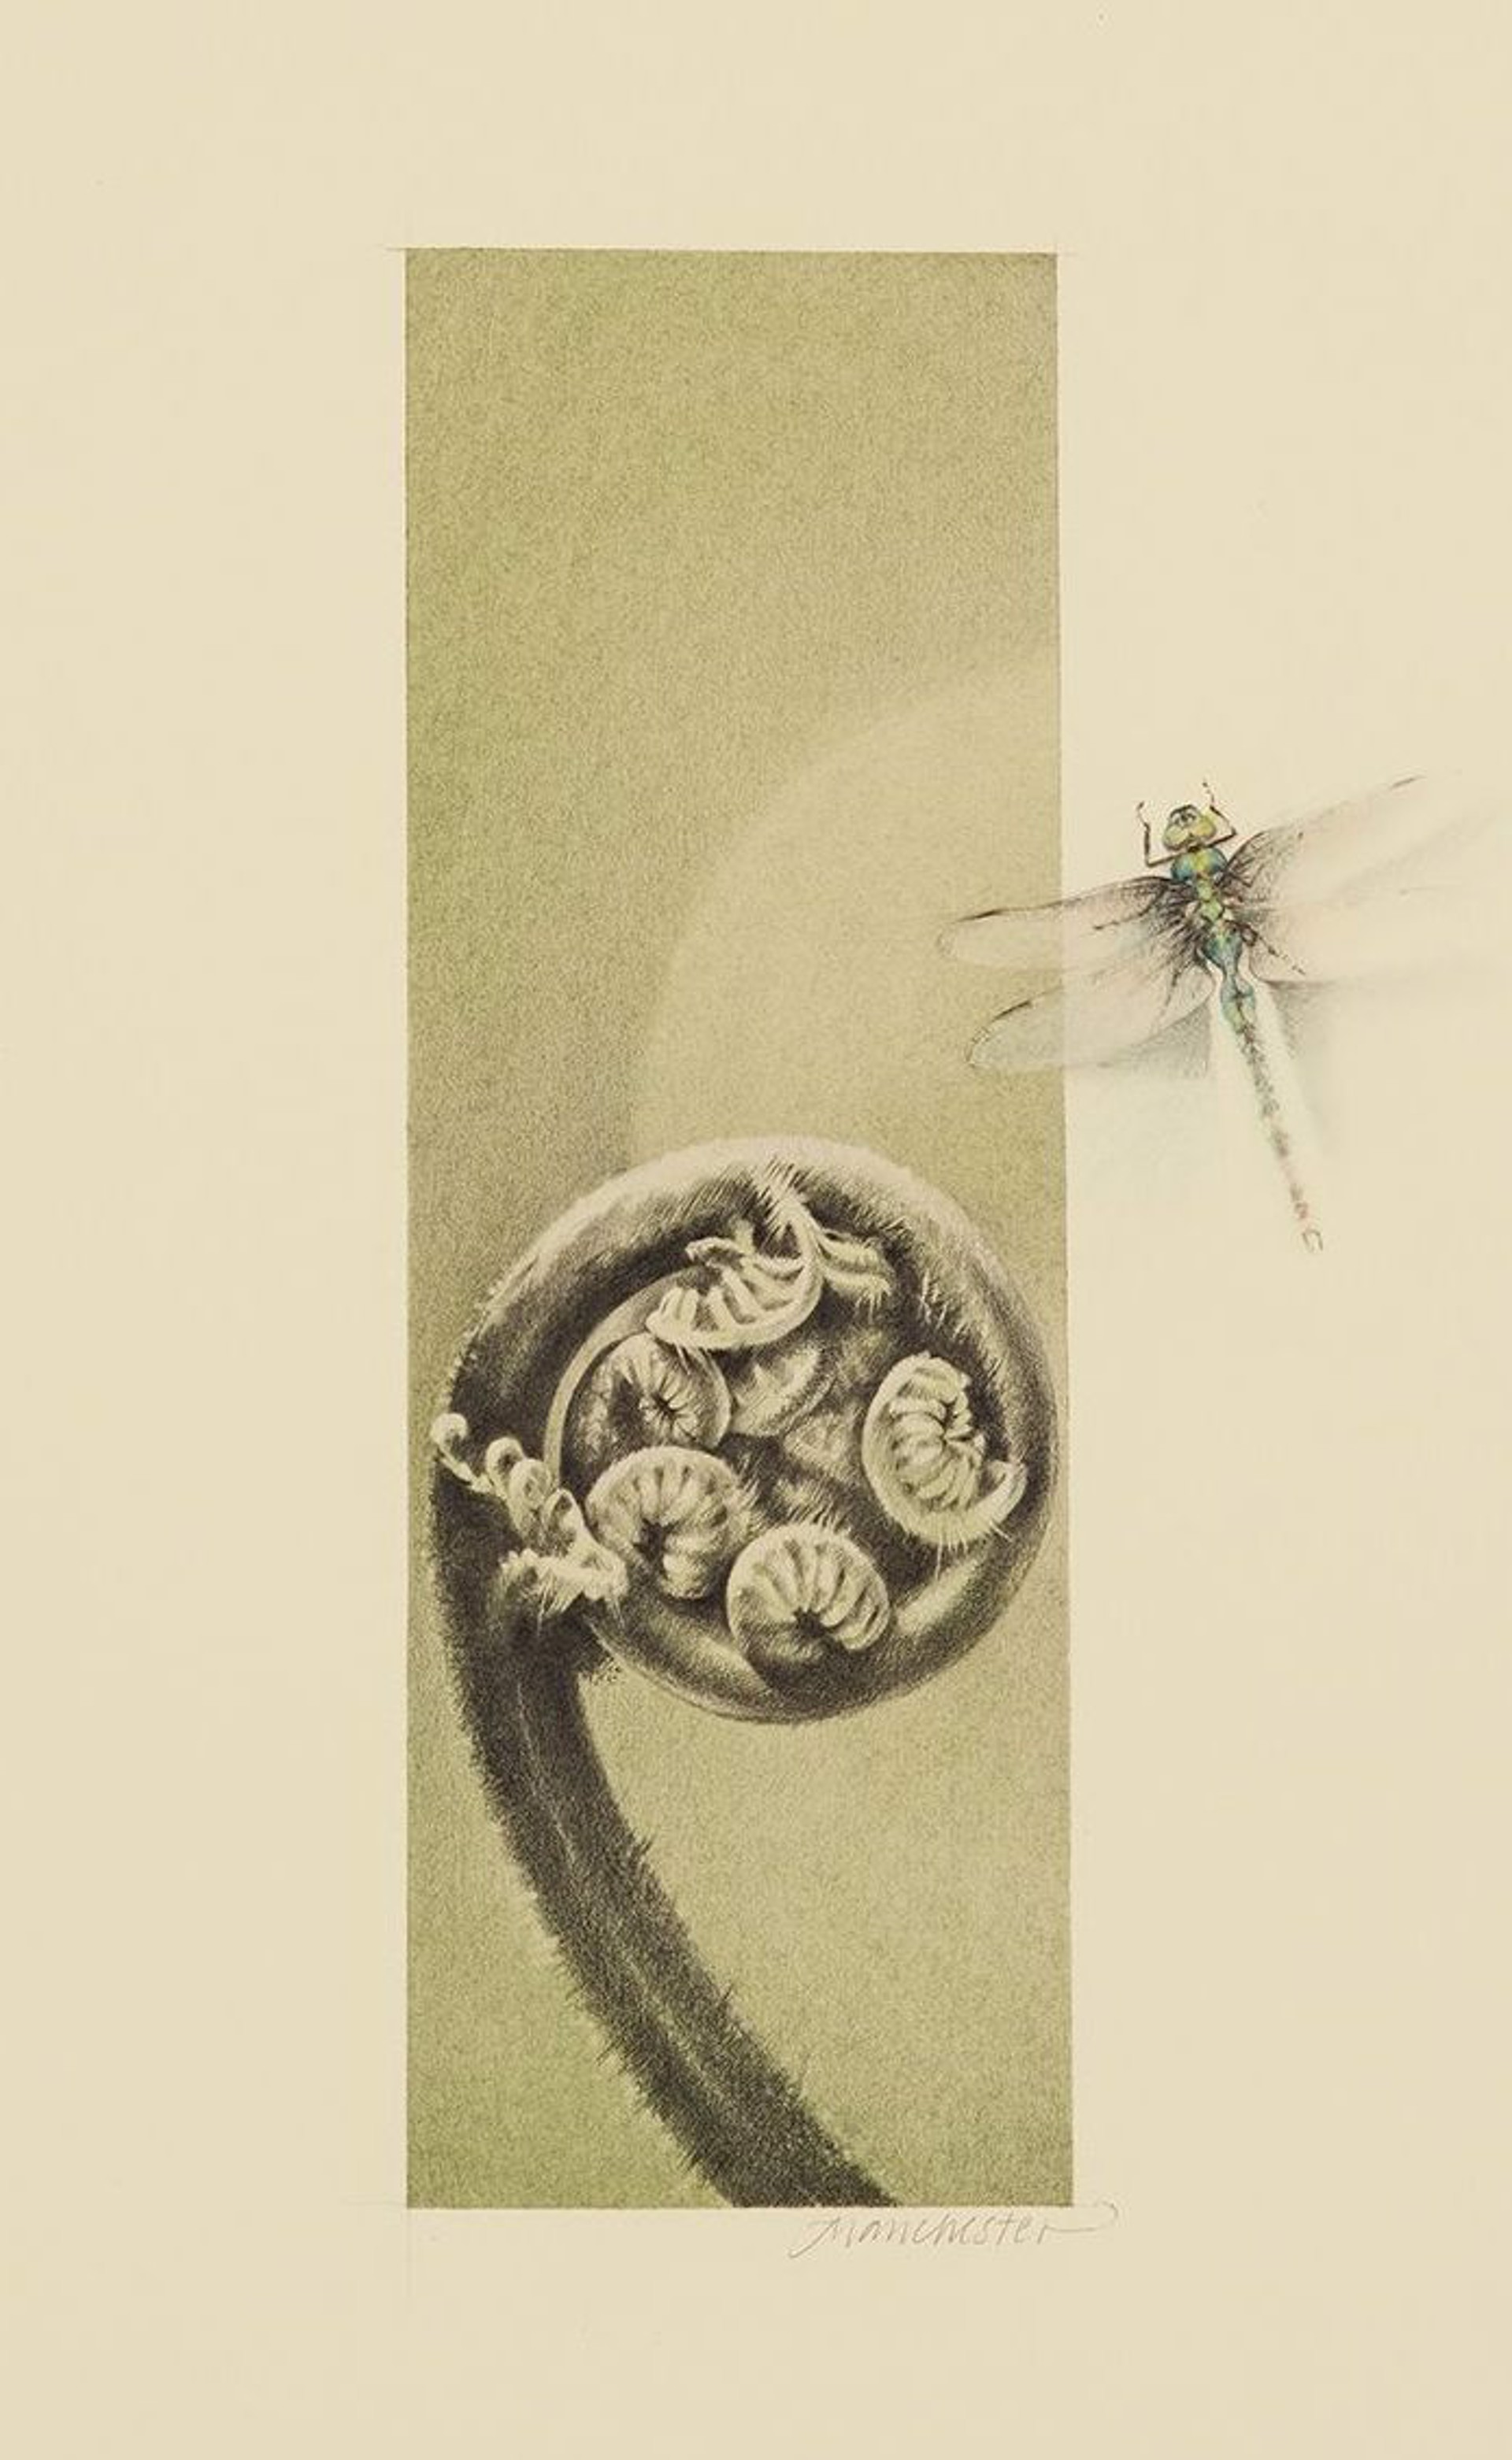 Garden Views #4, fiddlehead fern with Dragonfly by Susan Manchester